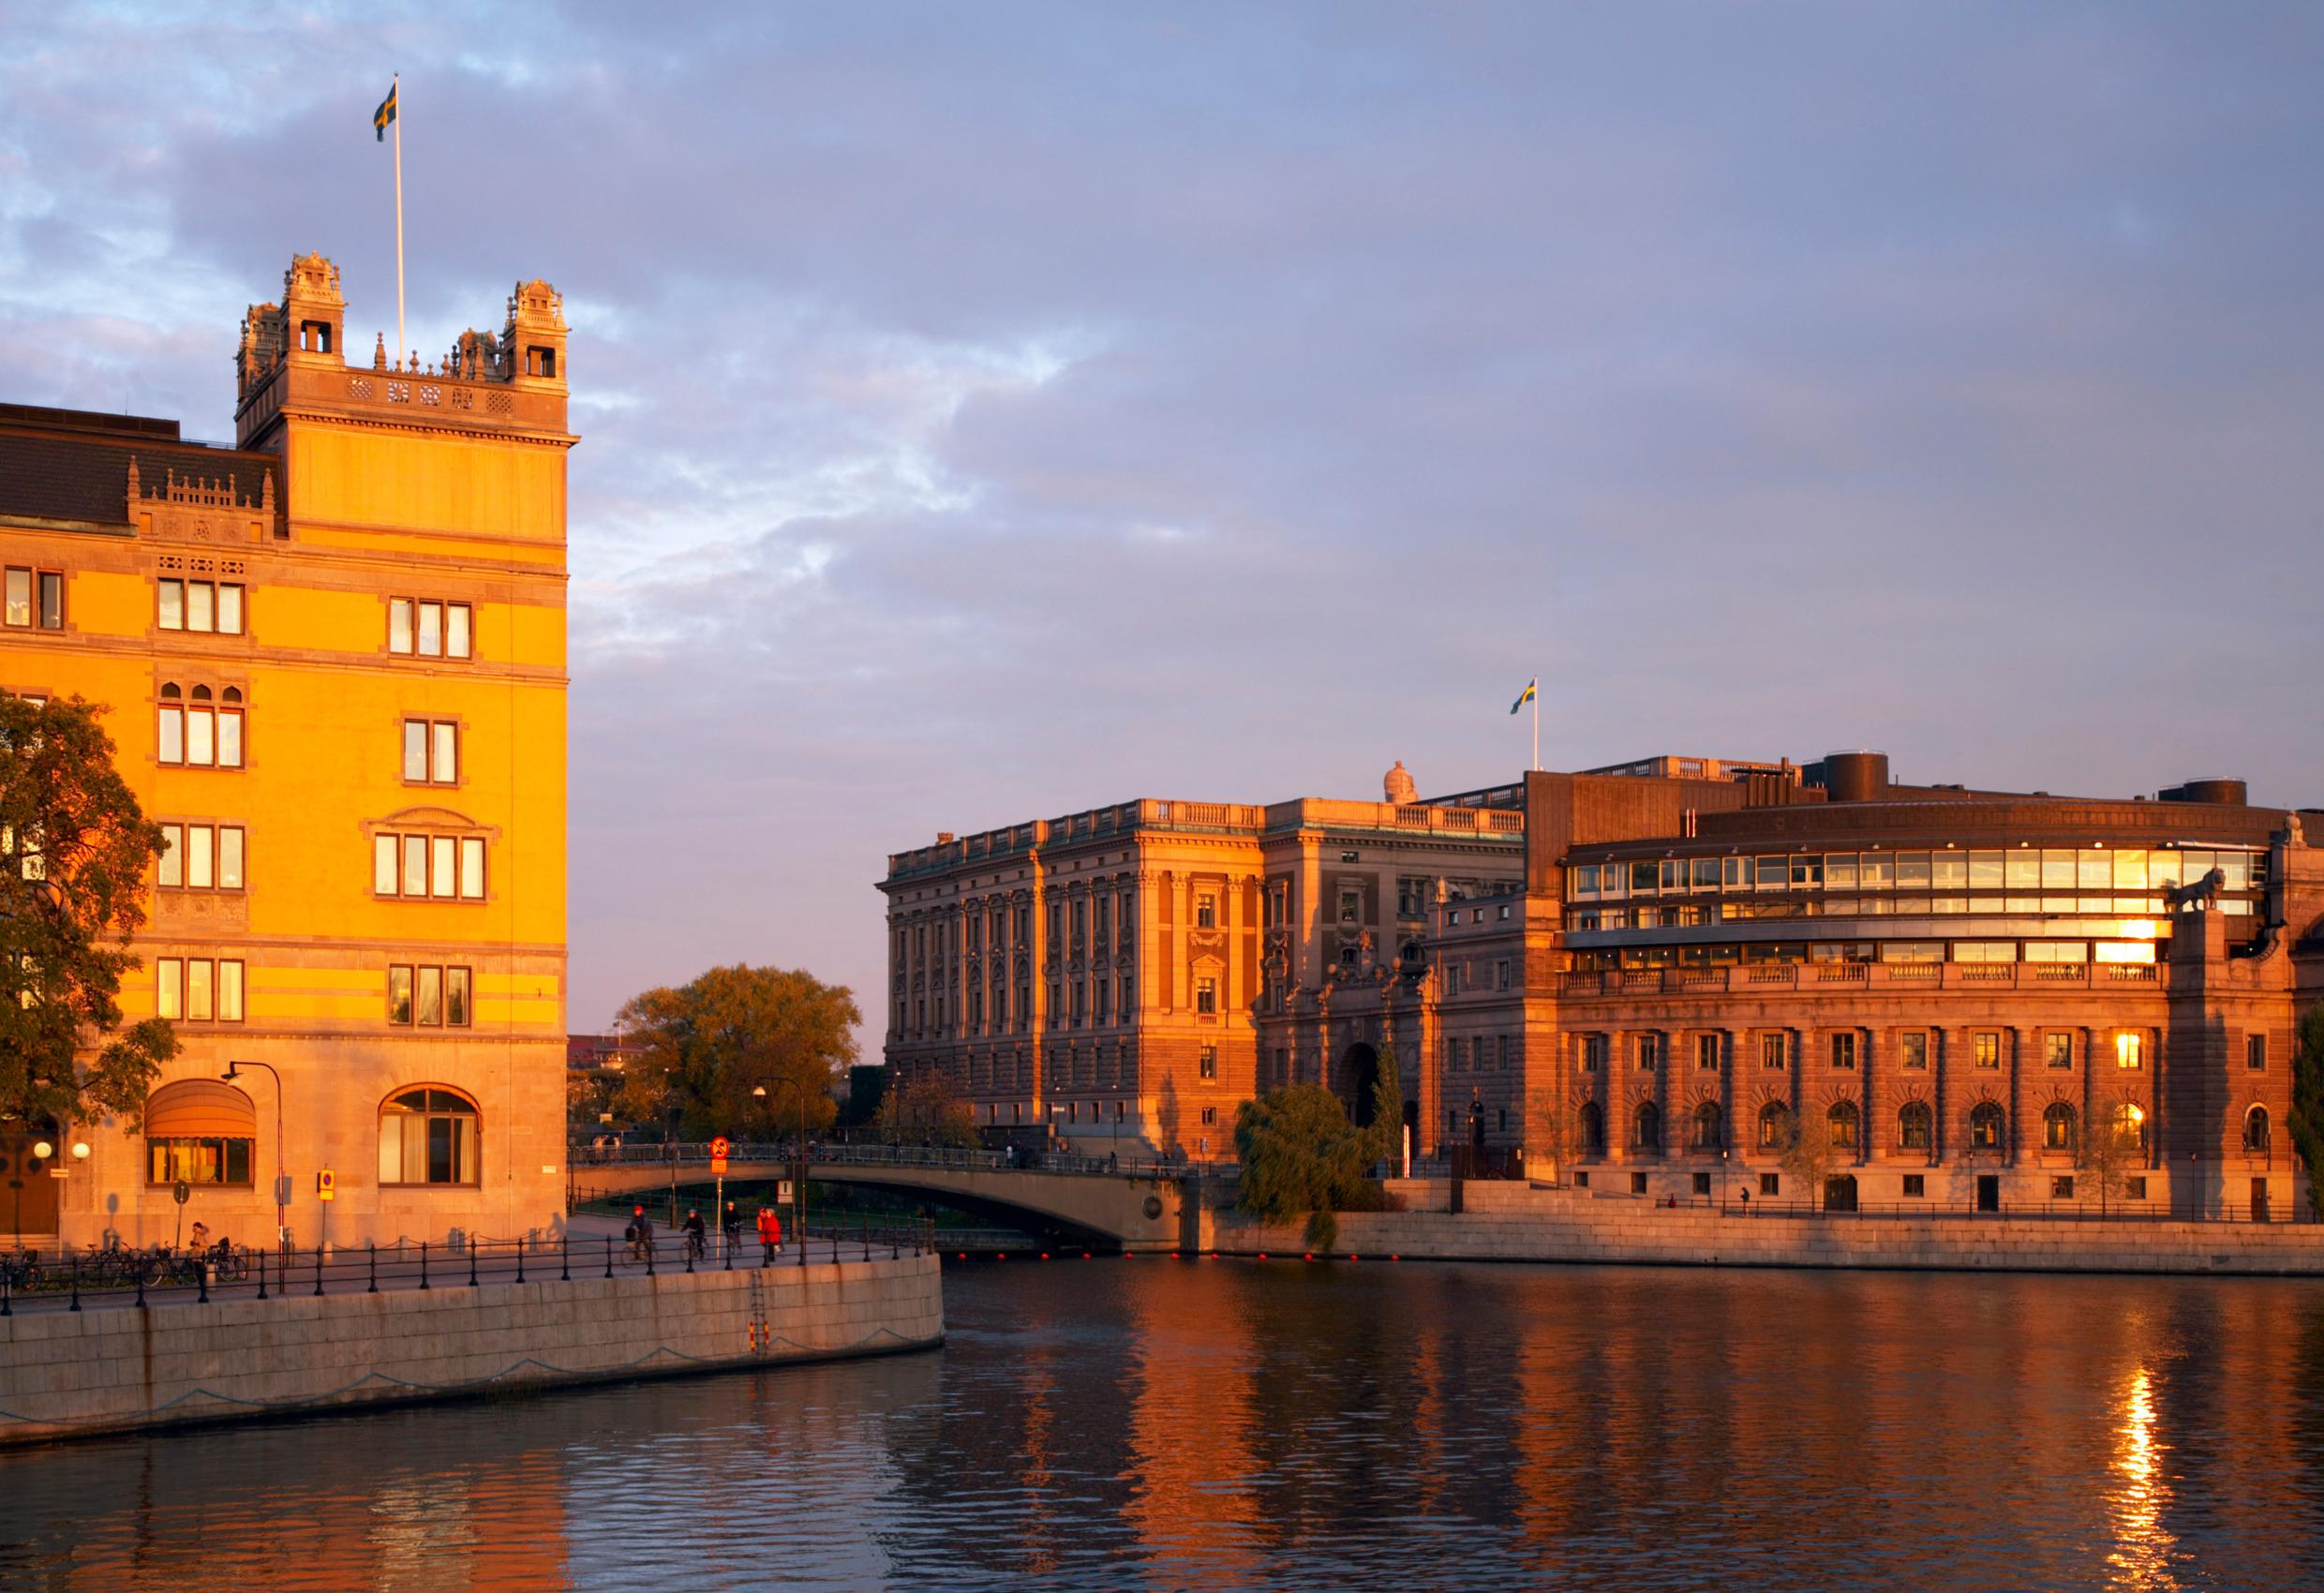 The offices of the Prime Minister, Rosenbad, to the left and the Swedish Parliament to the right.